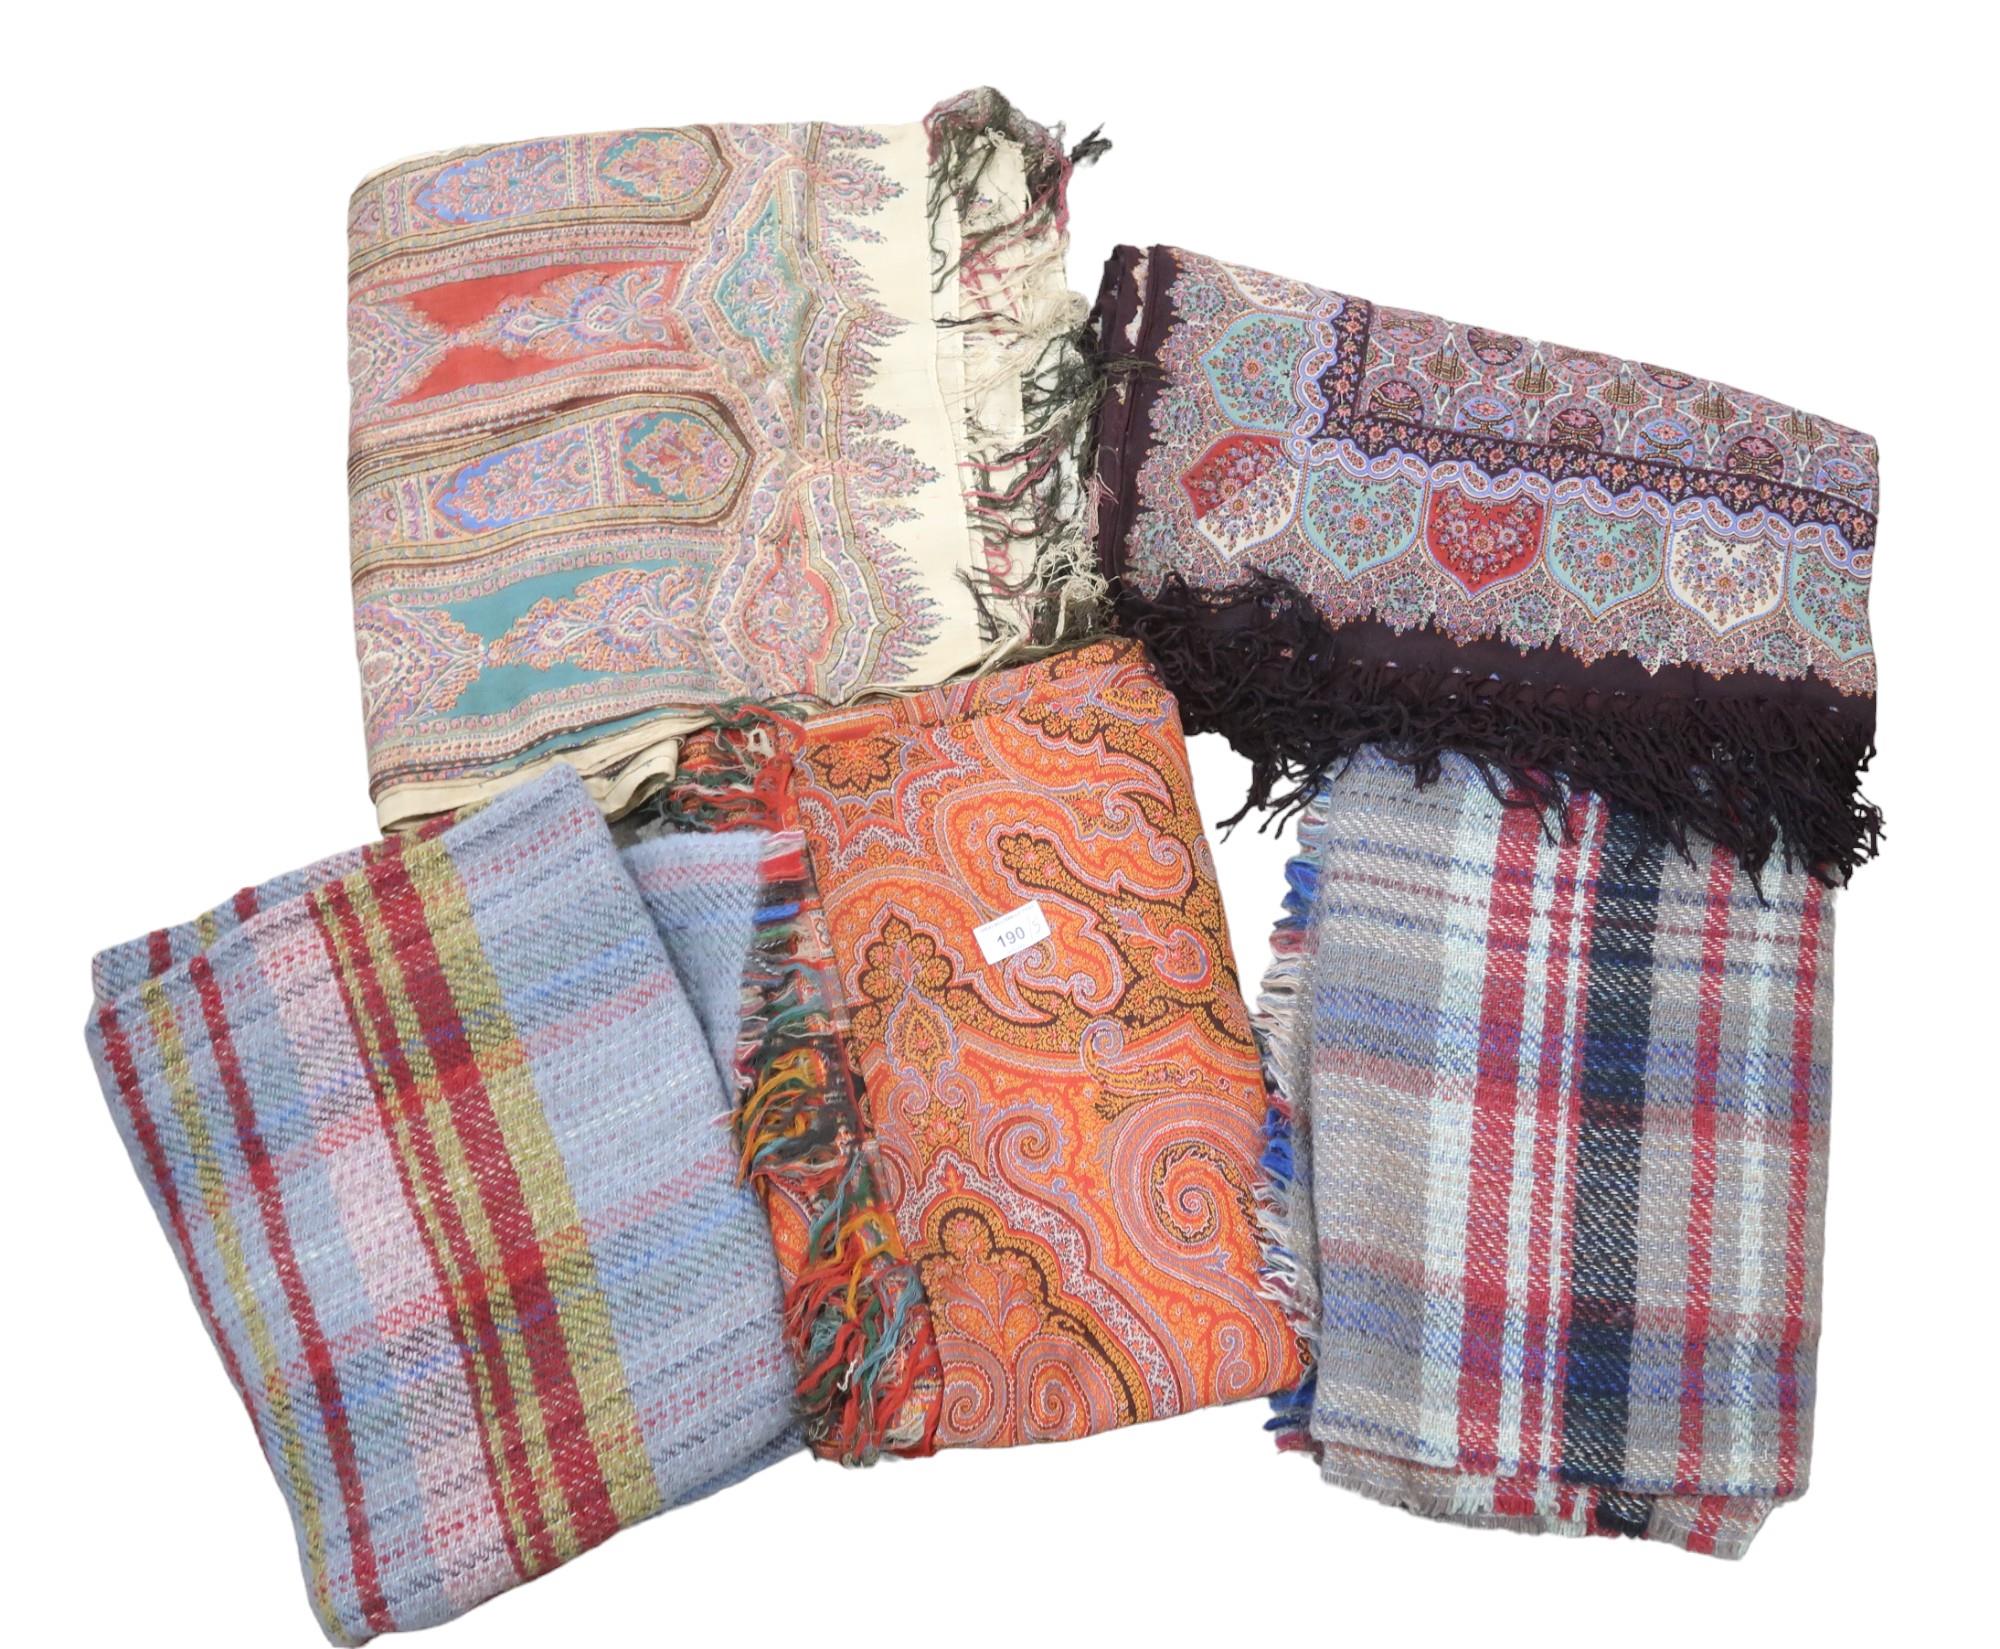 Two printed paisley shawls, a woven shawl and two woollen blankets Condition Report:Available upon